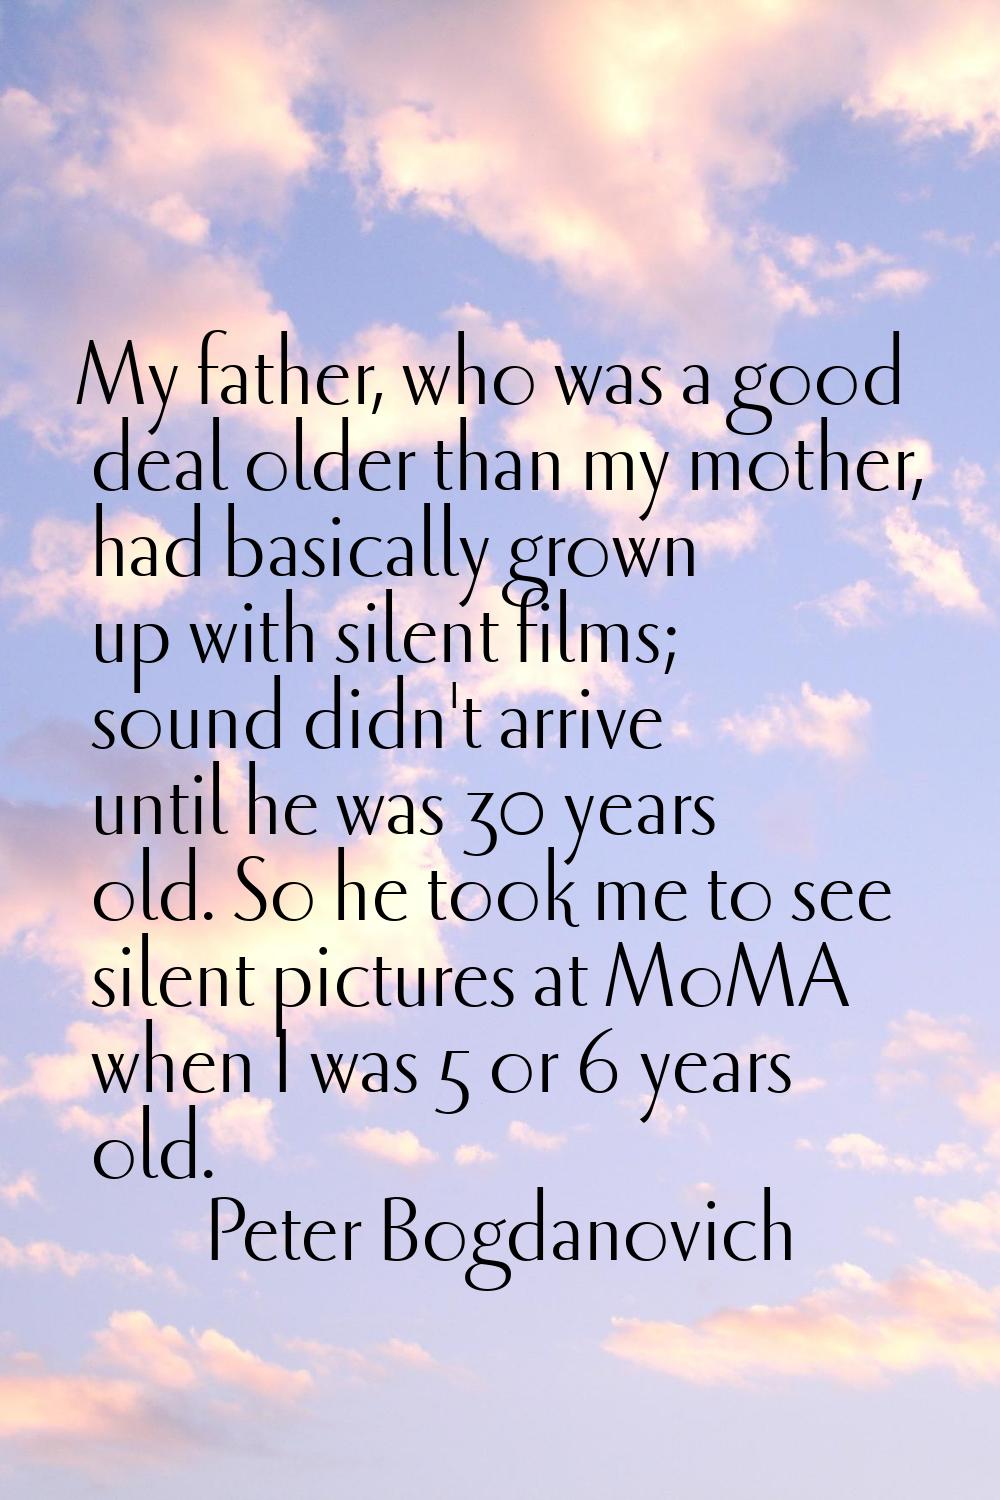 My father, who was a good deal older than my mother, had basically grown up with silent films; soun